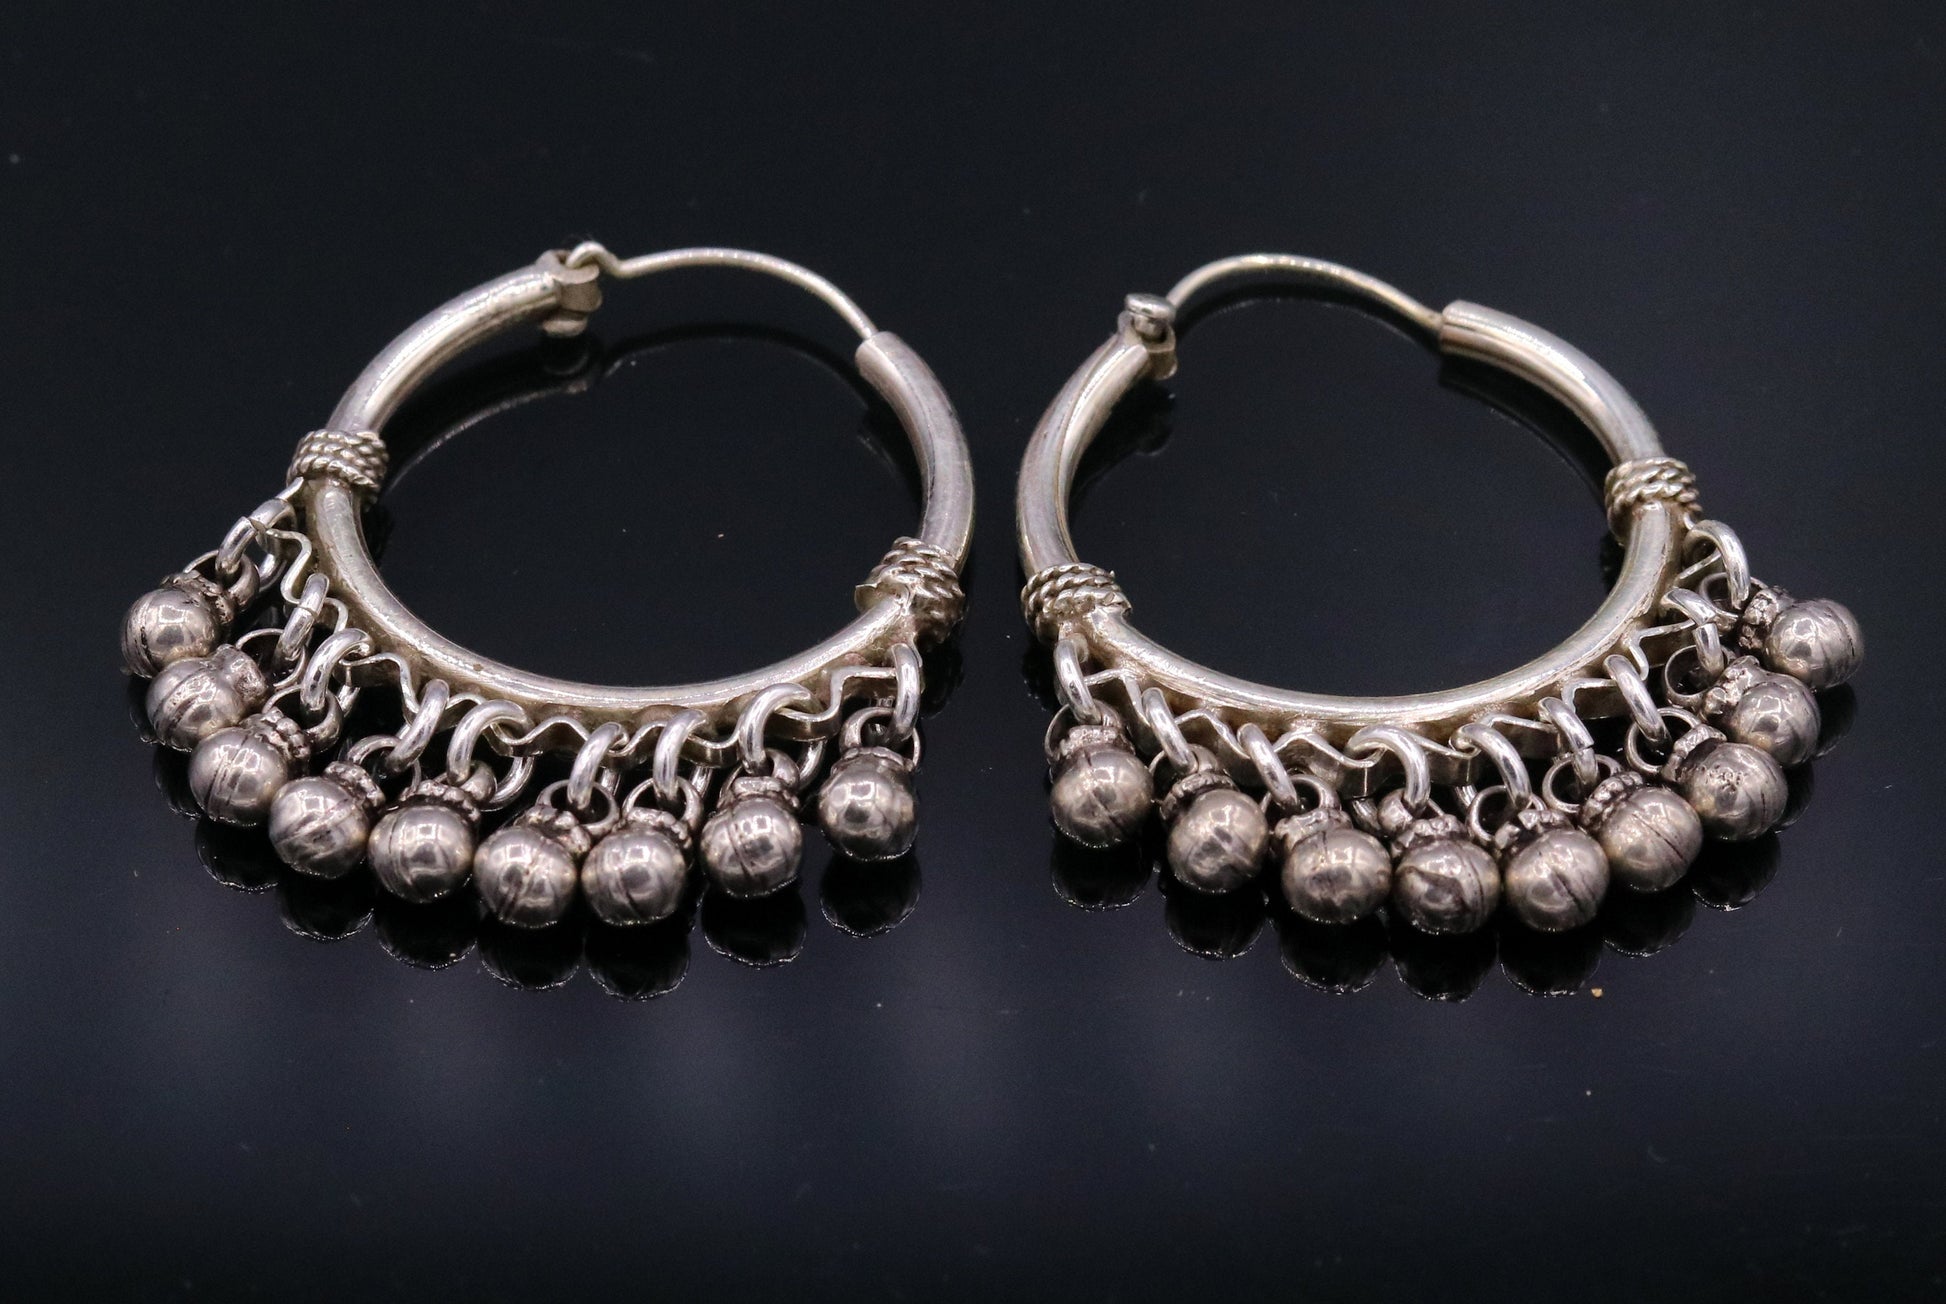 925 Sterling silver handmade fabulous hoops earrings with hanging bells amazing antique designer earrings jewelry for girl's s334 - TRIBAL ORNAMENTS